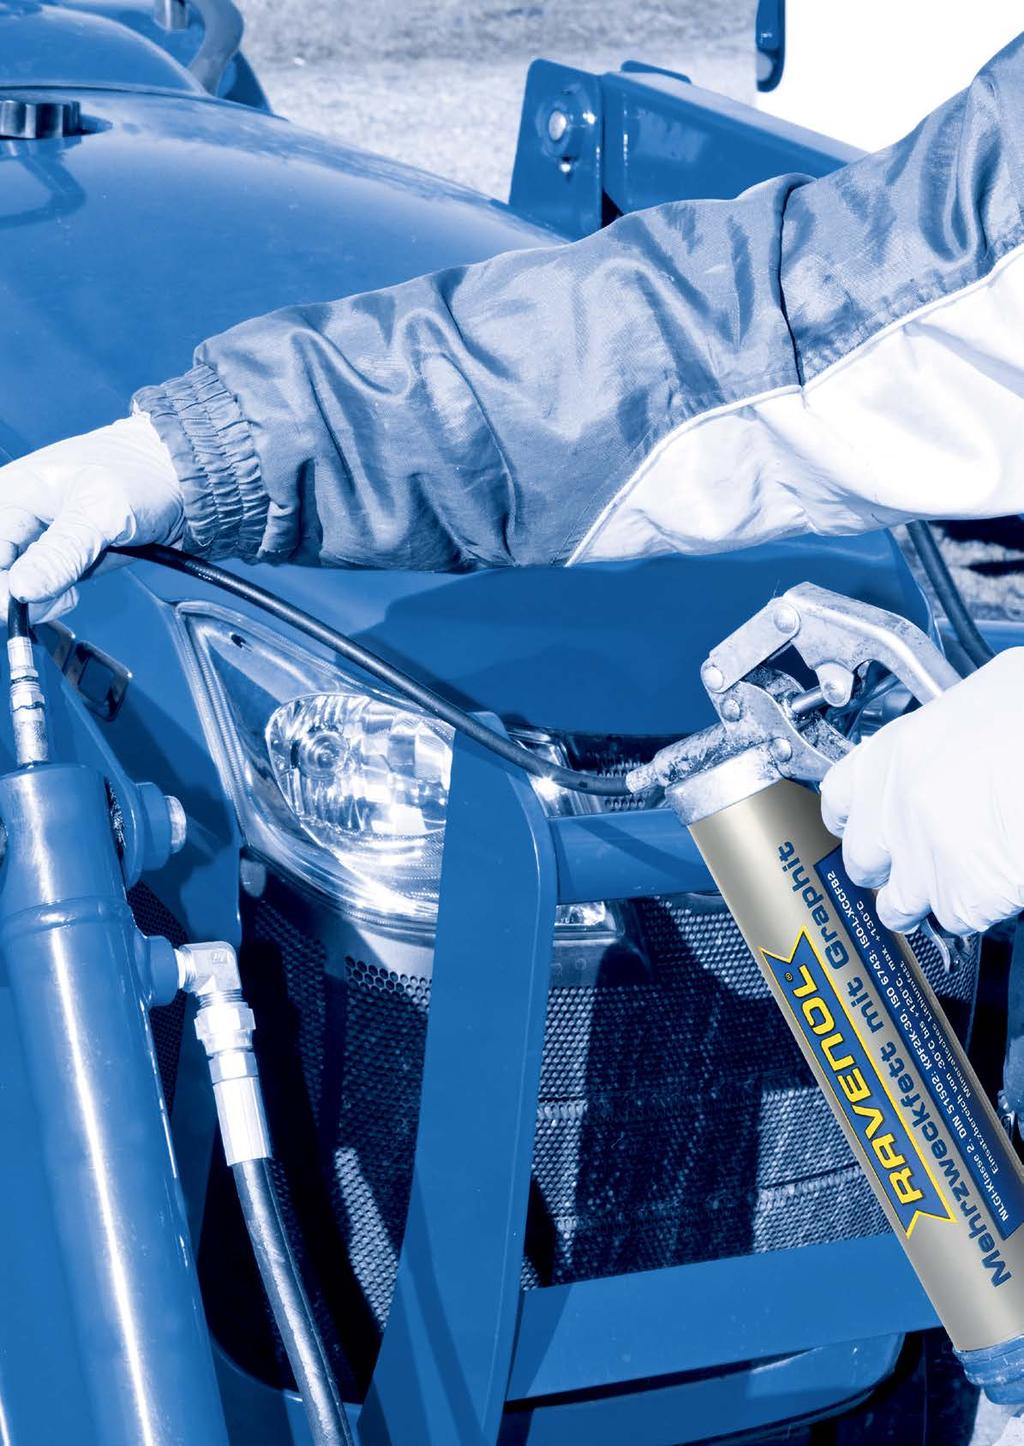 Greases RAVENOL Mehrzweckfett OML NLGI 2 Specification to DIN 51 502: K2K-30 Lithium saponified multipurpose grease for the lubrication of lightly loaded bearings and all machine parts. MB 267.